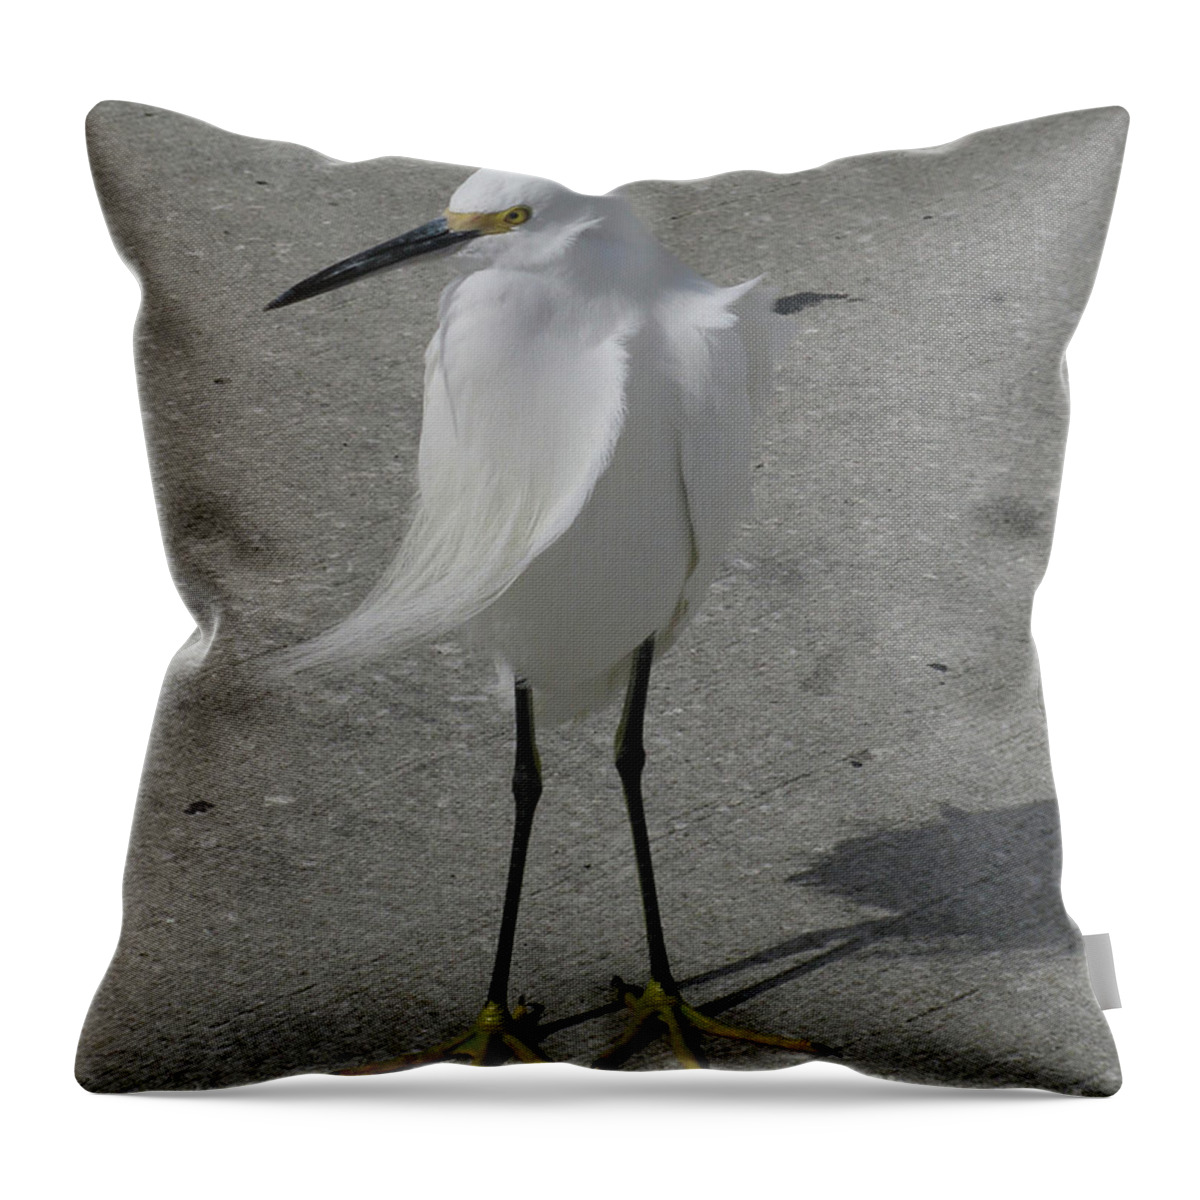 Bird Throw Pillow featuring the photograph A Windy Day by Donna Brown